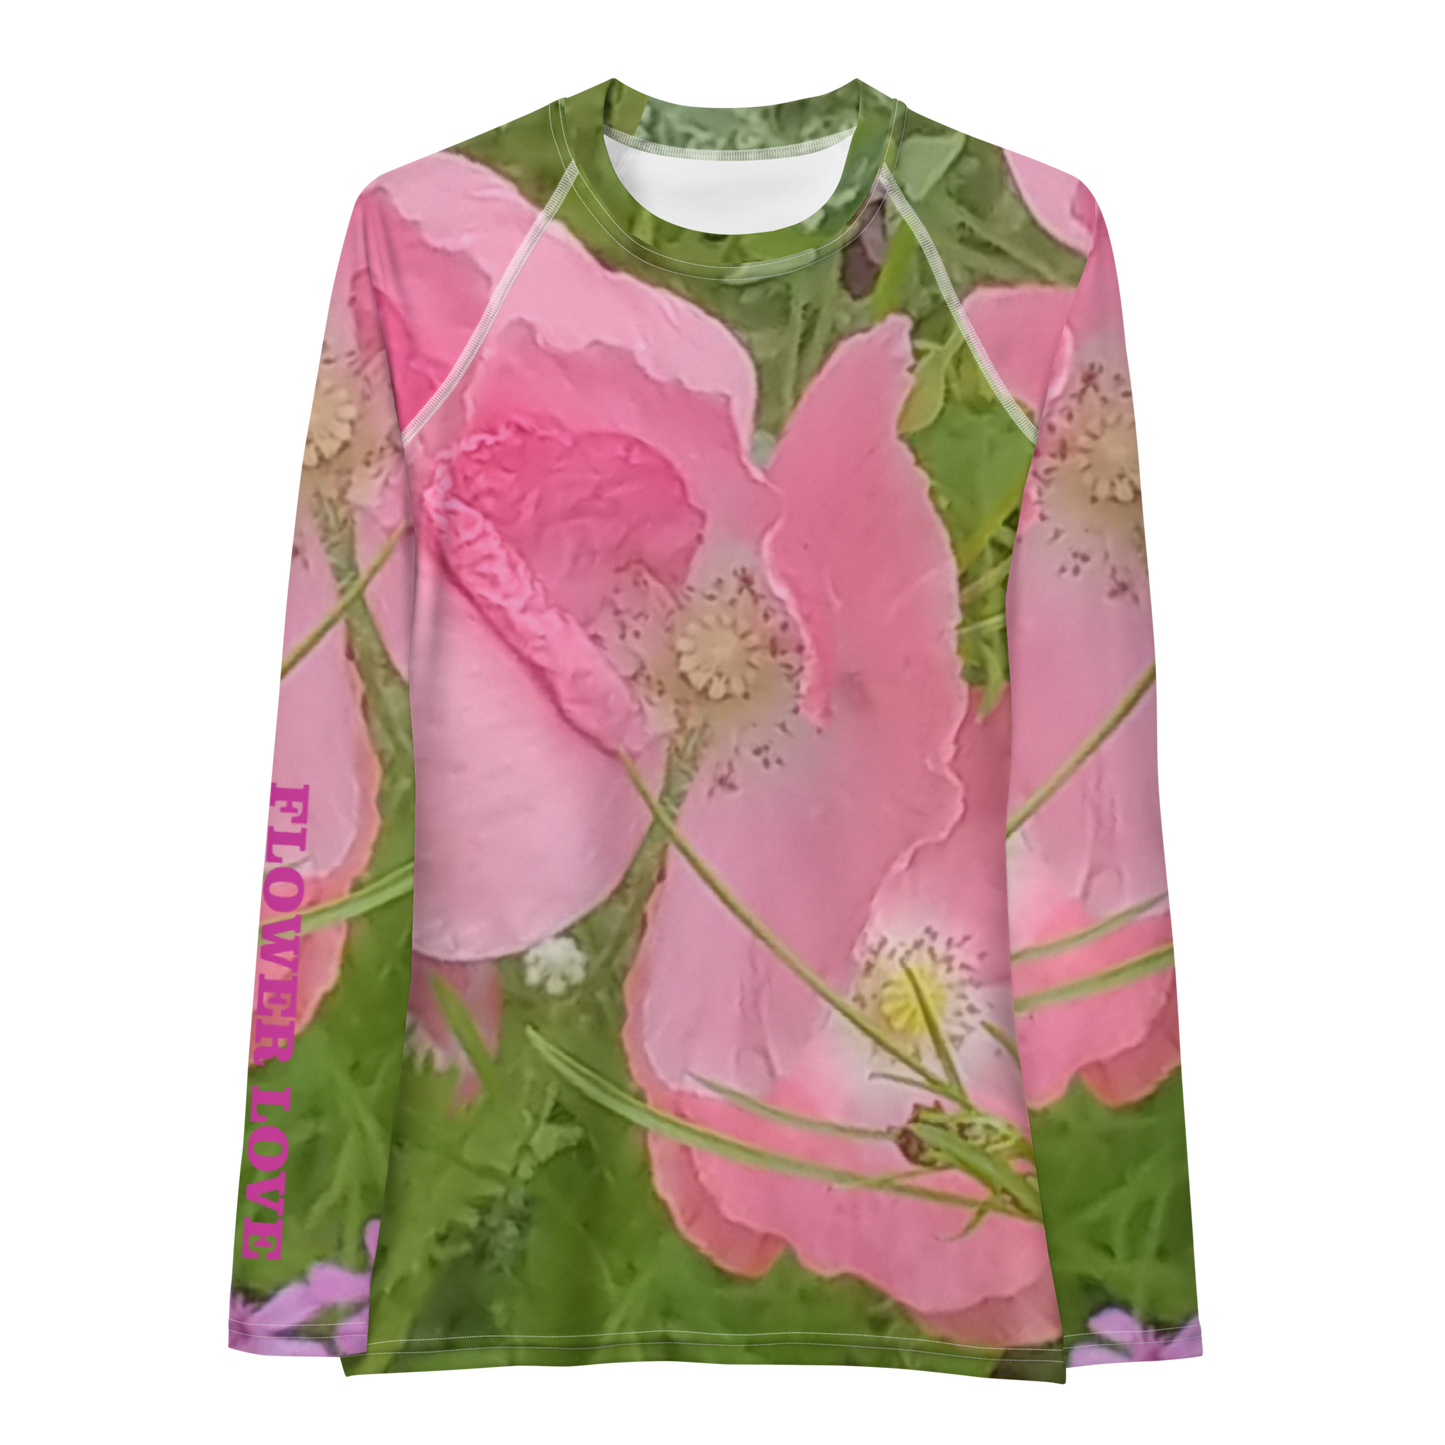 The FLOWER LOVE Collection - "Pretty Pink Poppies" Design Luxurious Women's Rash Guard, Sun Protective Clothing, Sports & Fitness Clothing